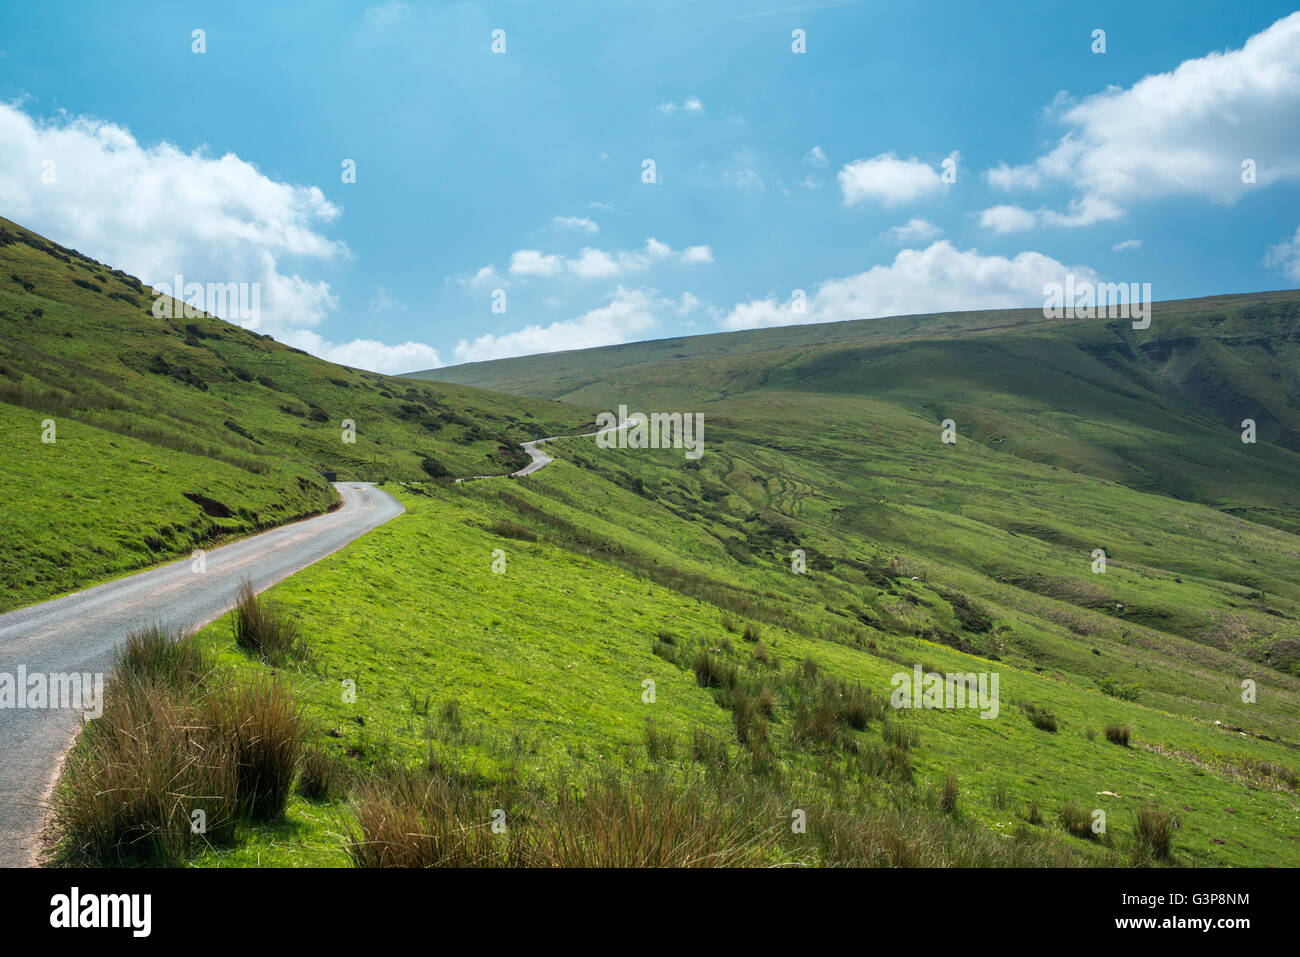 A country road in a valley, climbing towards a range of mountains. Stock Photo